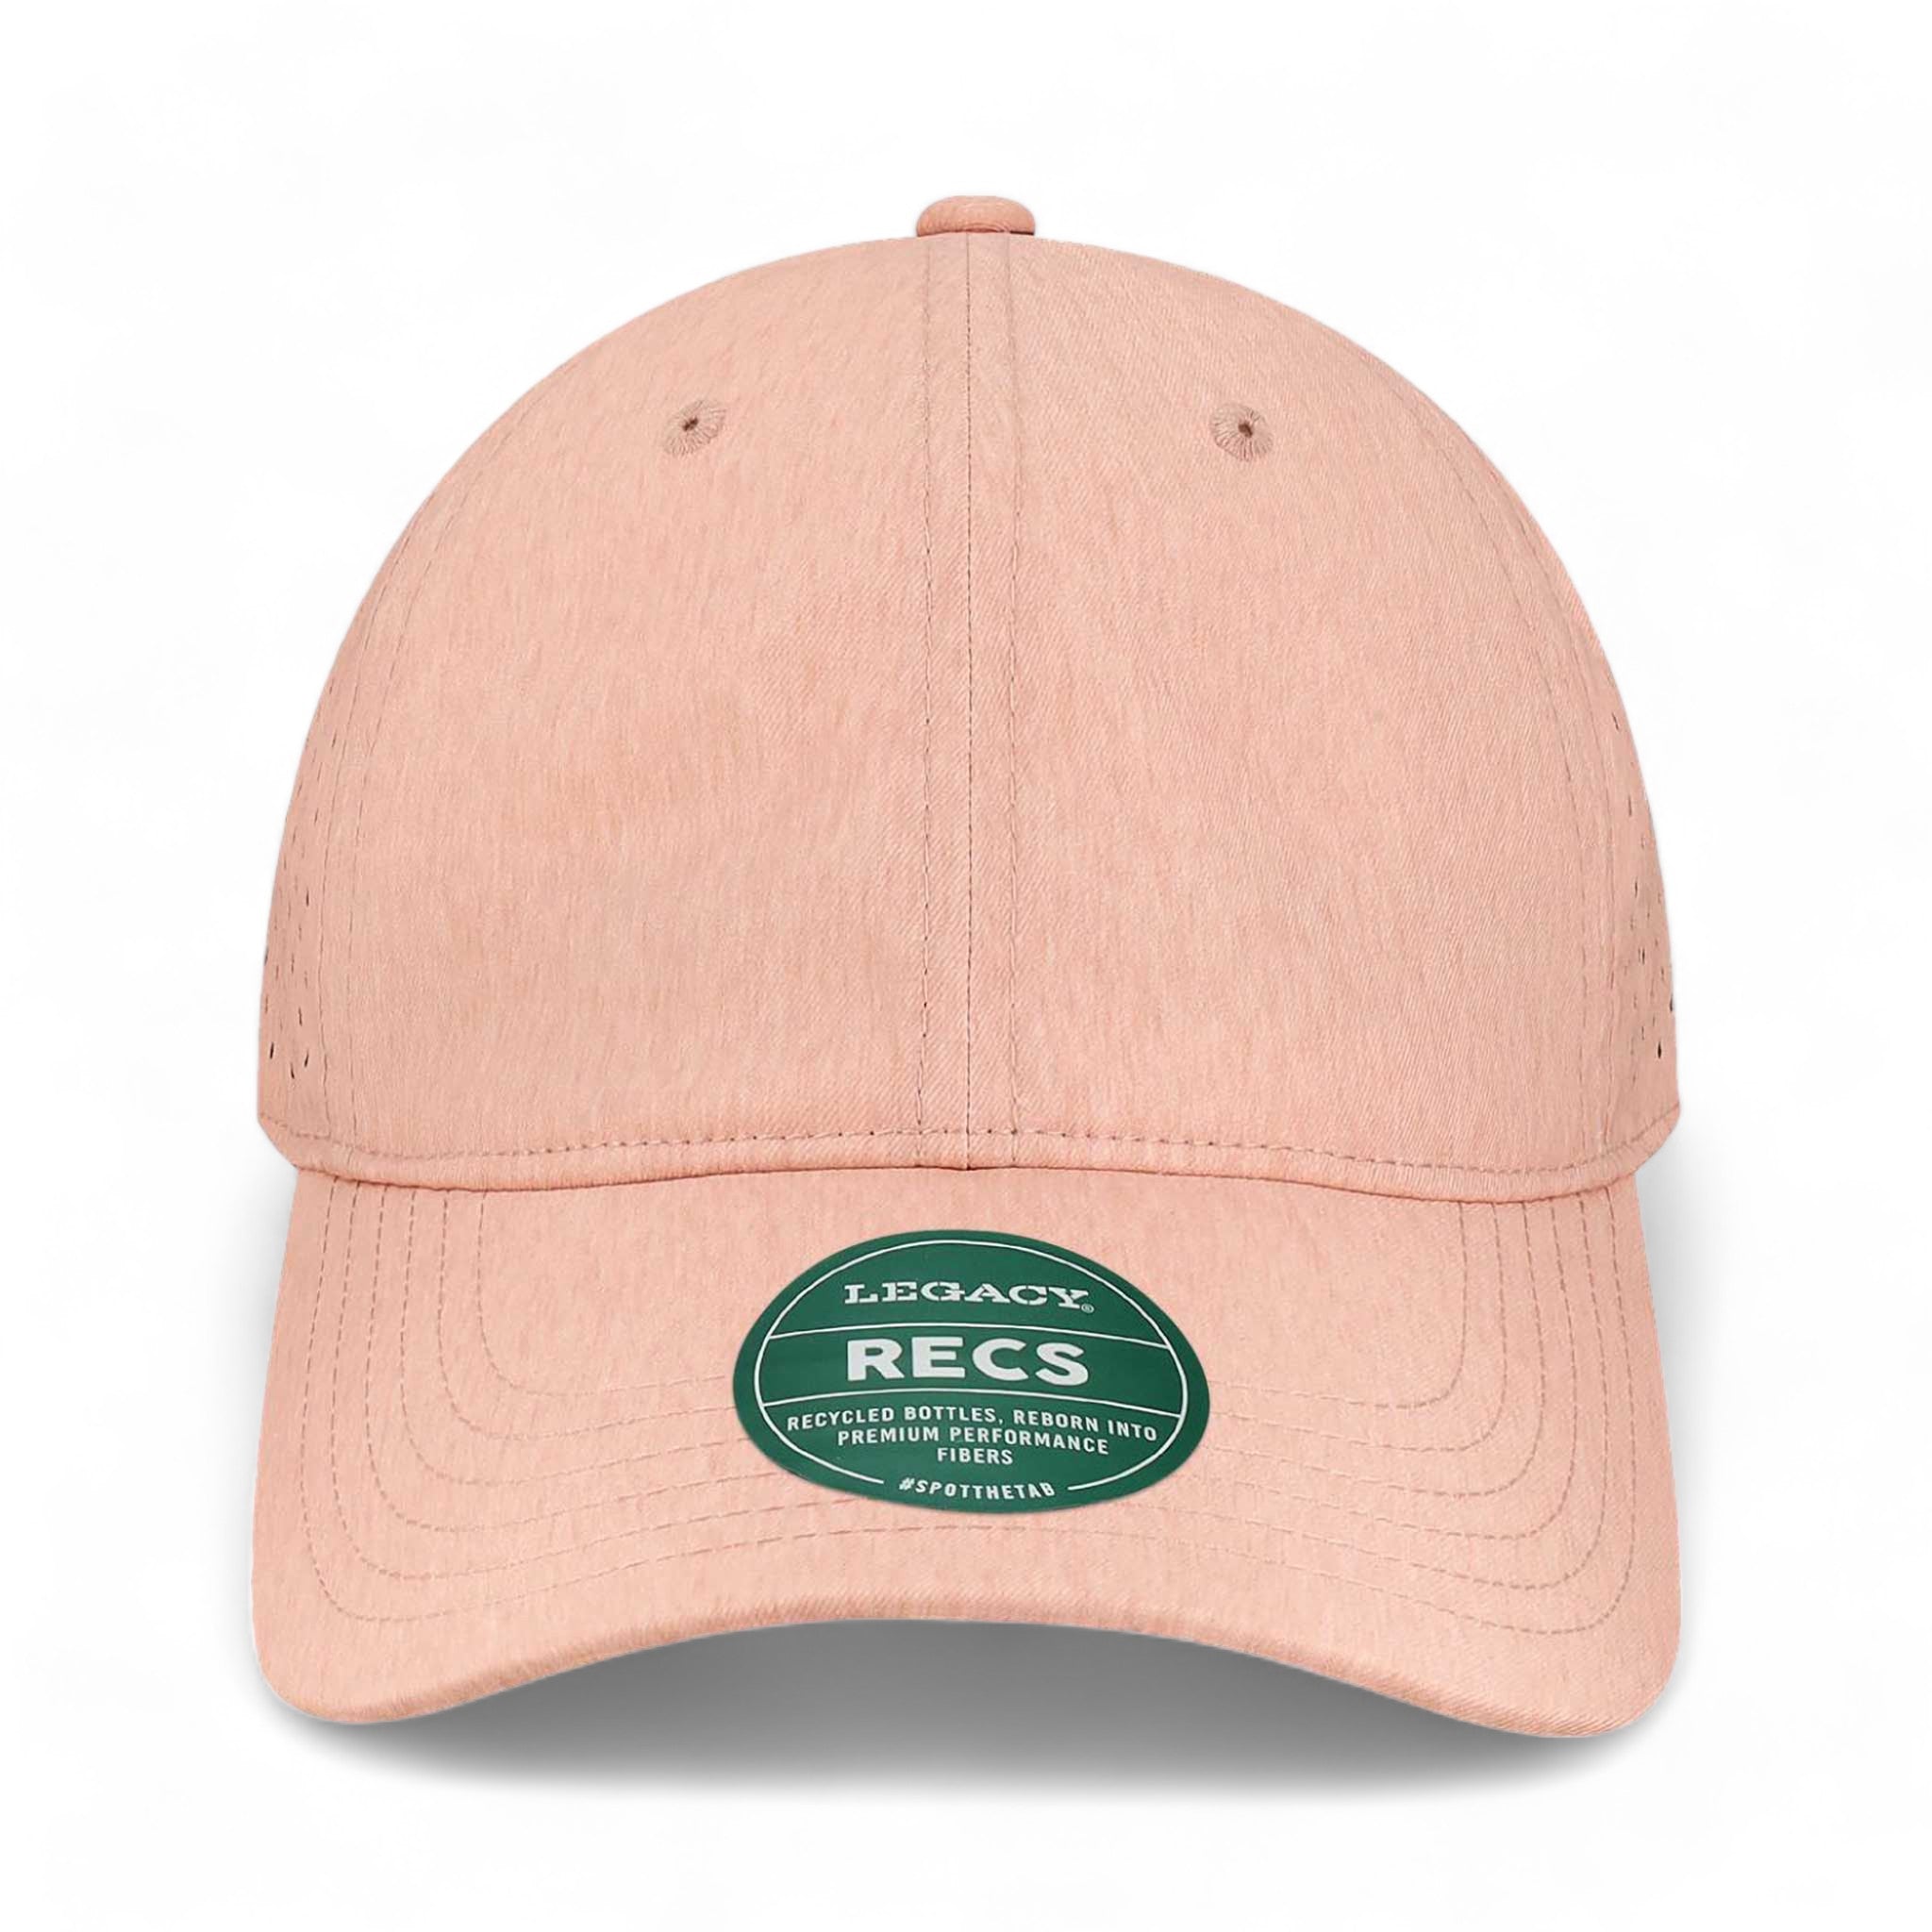 Front view of LEGACY RECS custom hat in eco dusty rose